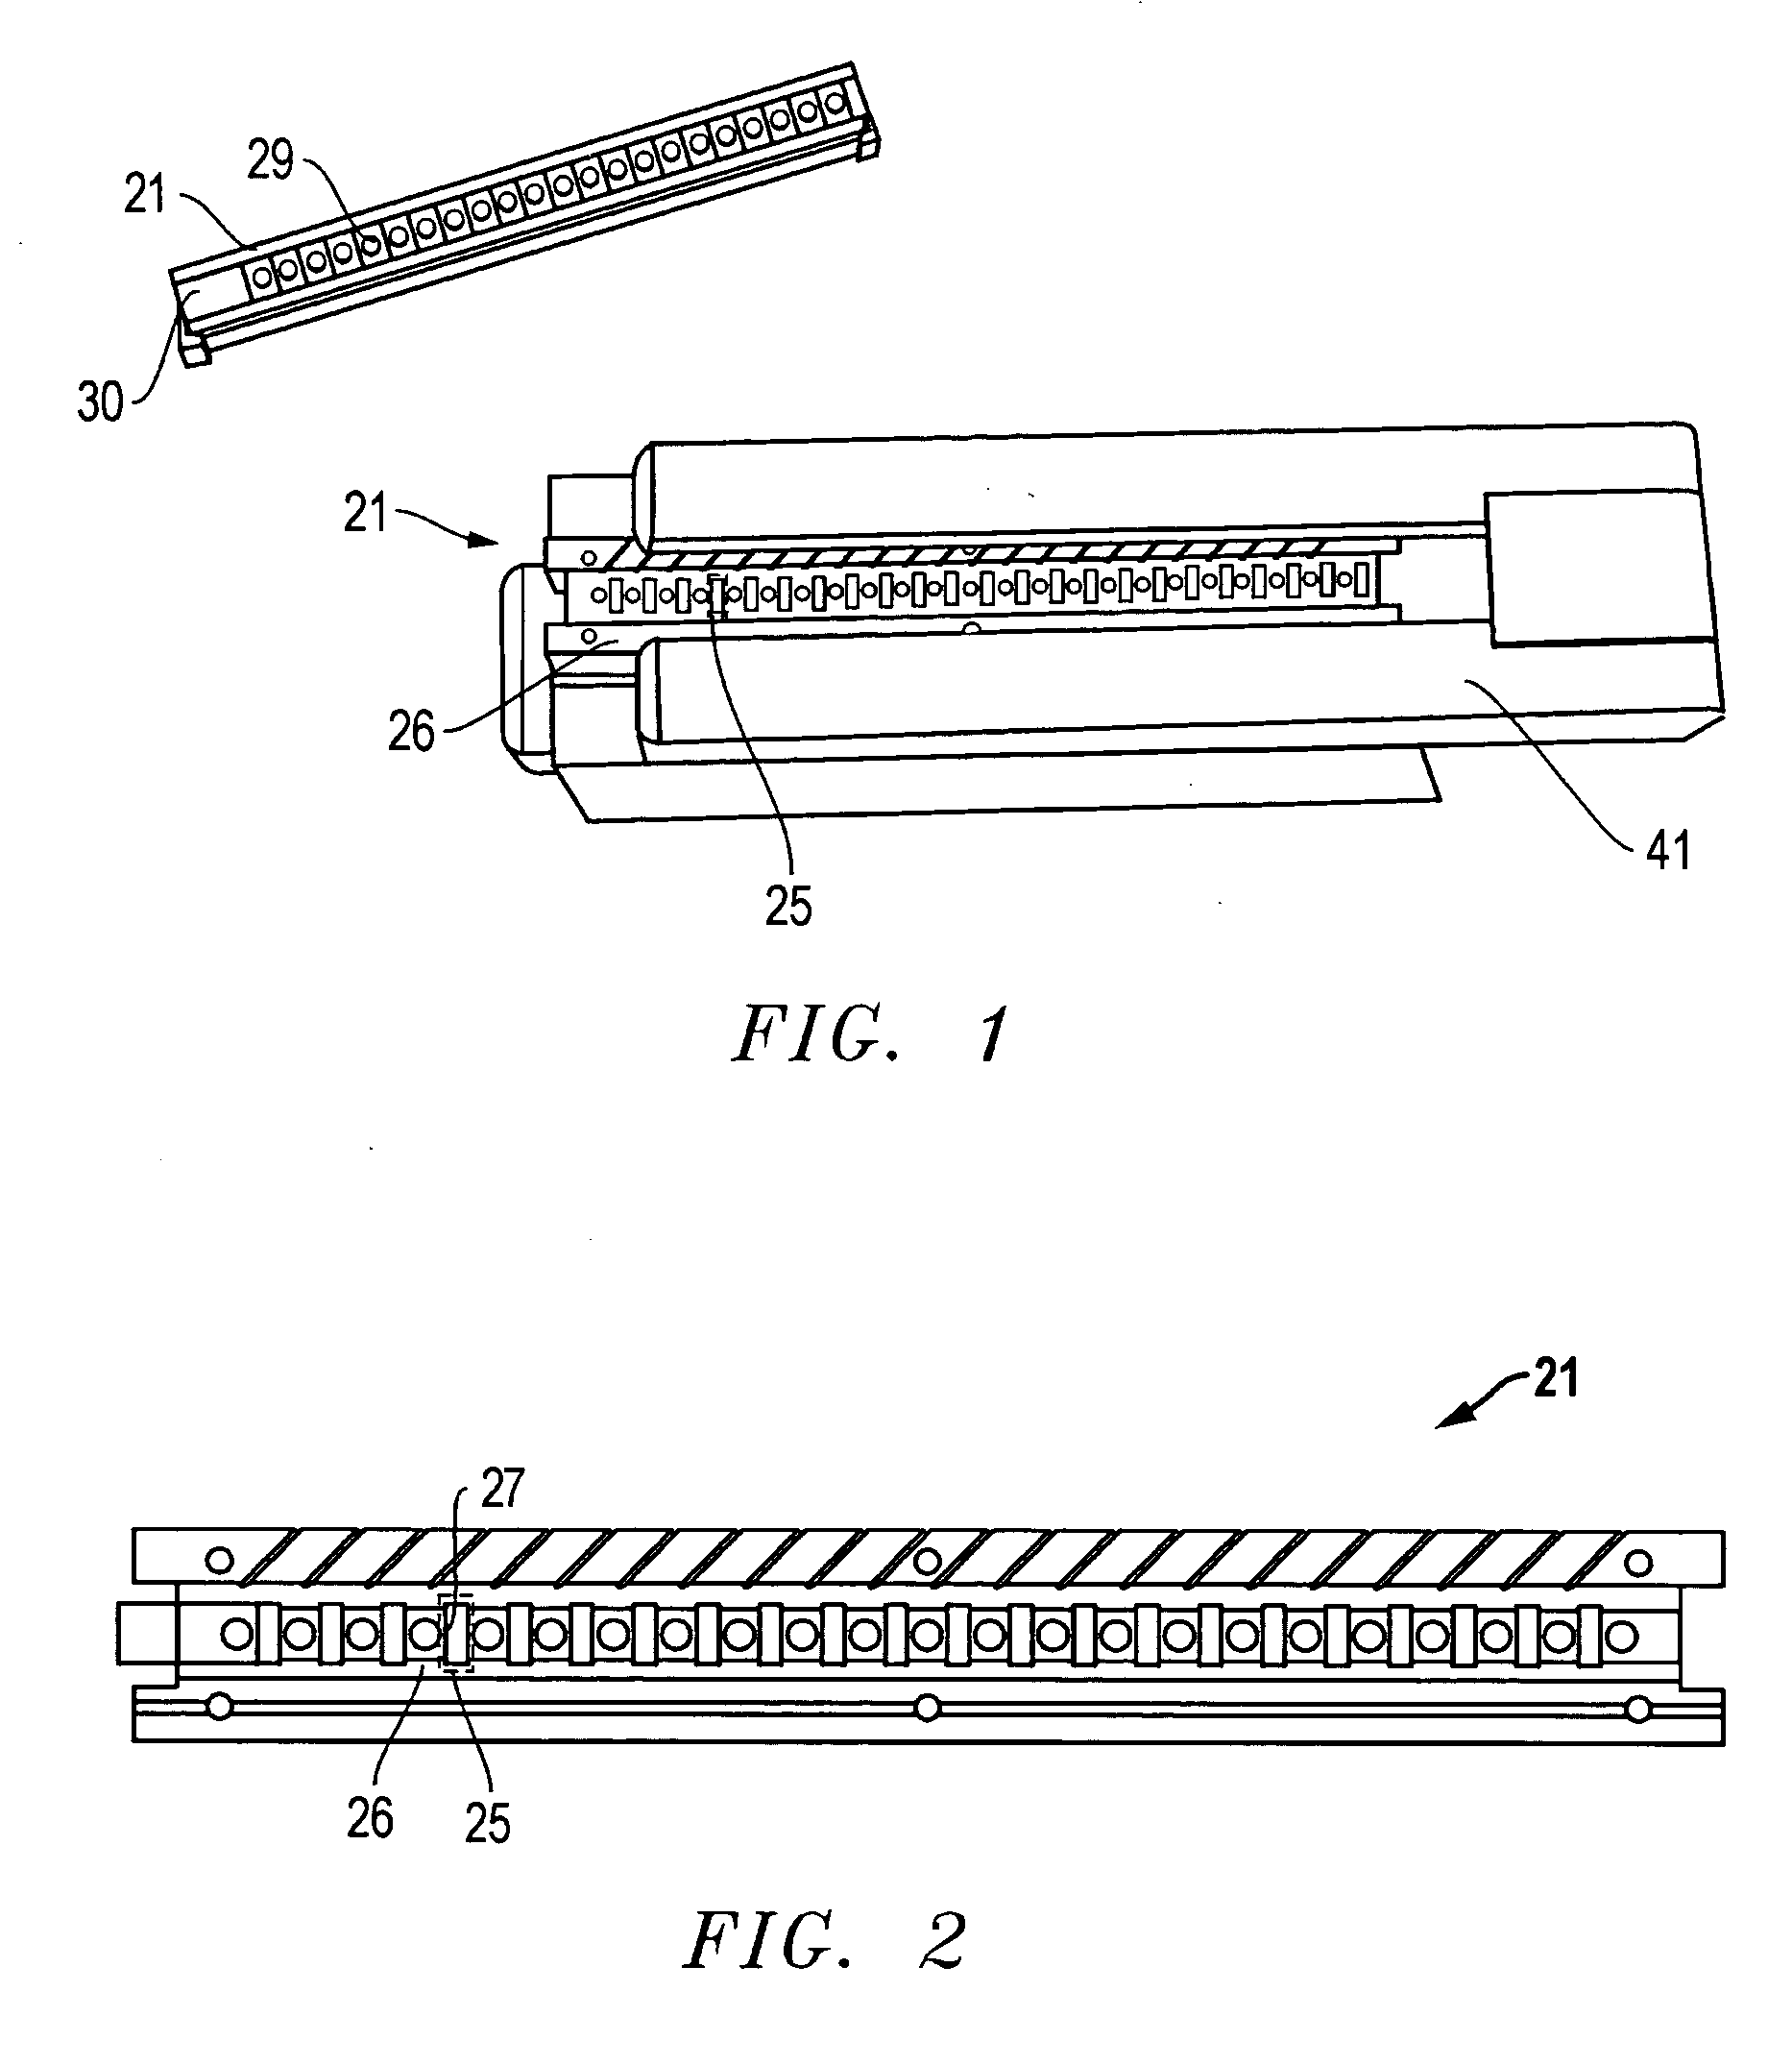 System, method, and apparatus for handling and testing individual sliders in a row-like format in single slider processing systems